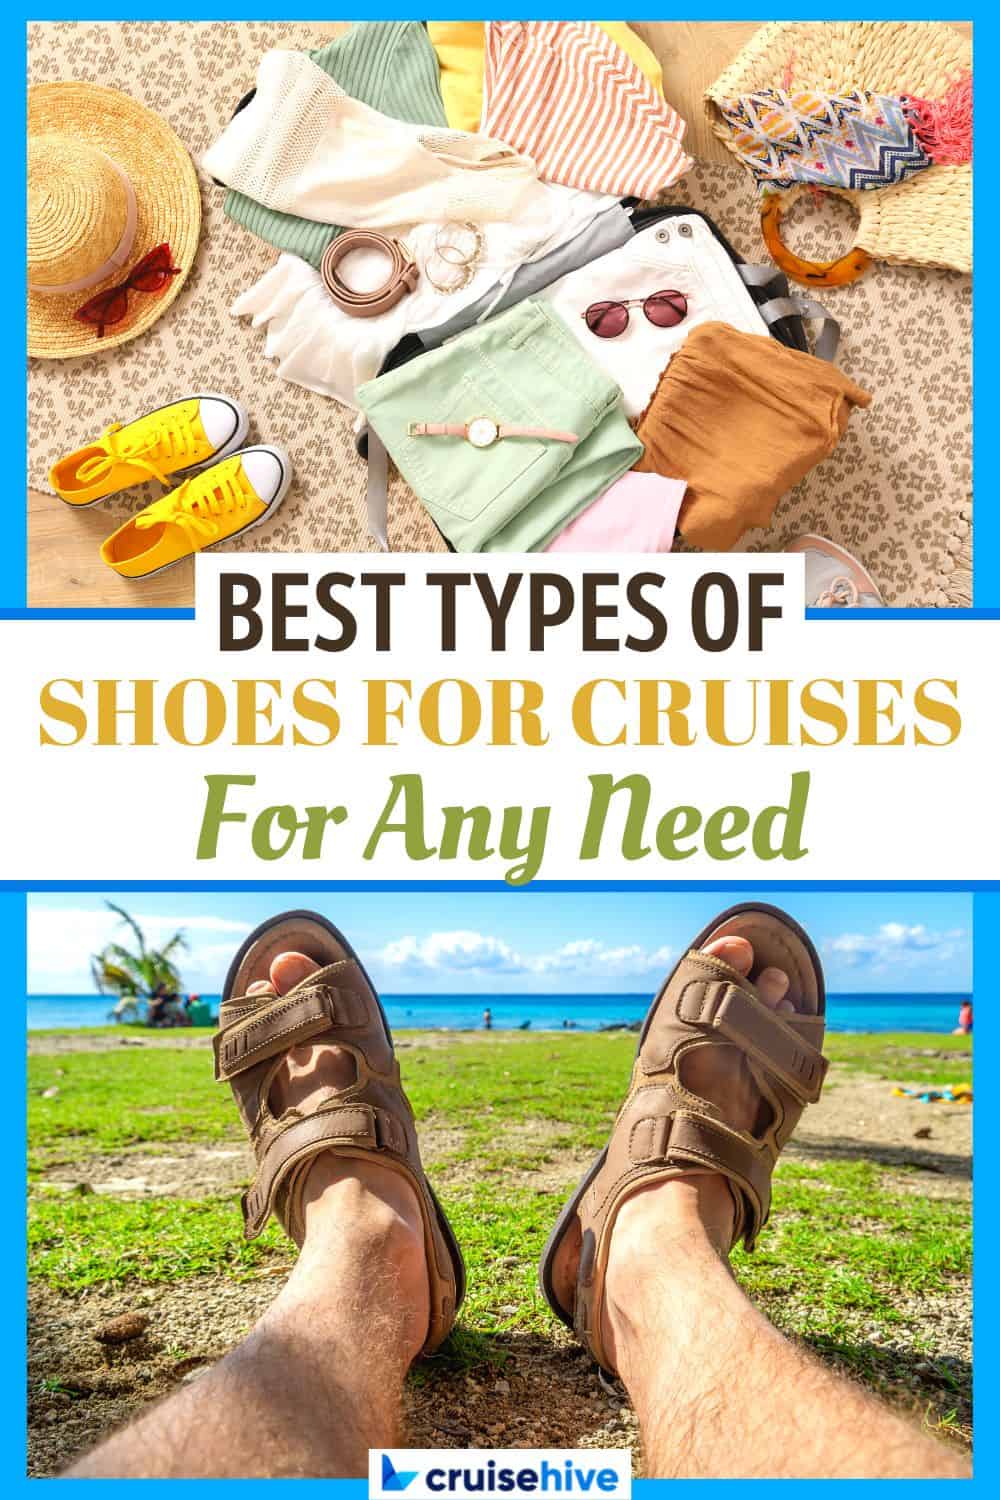 Shoes for Cruises